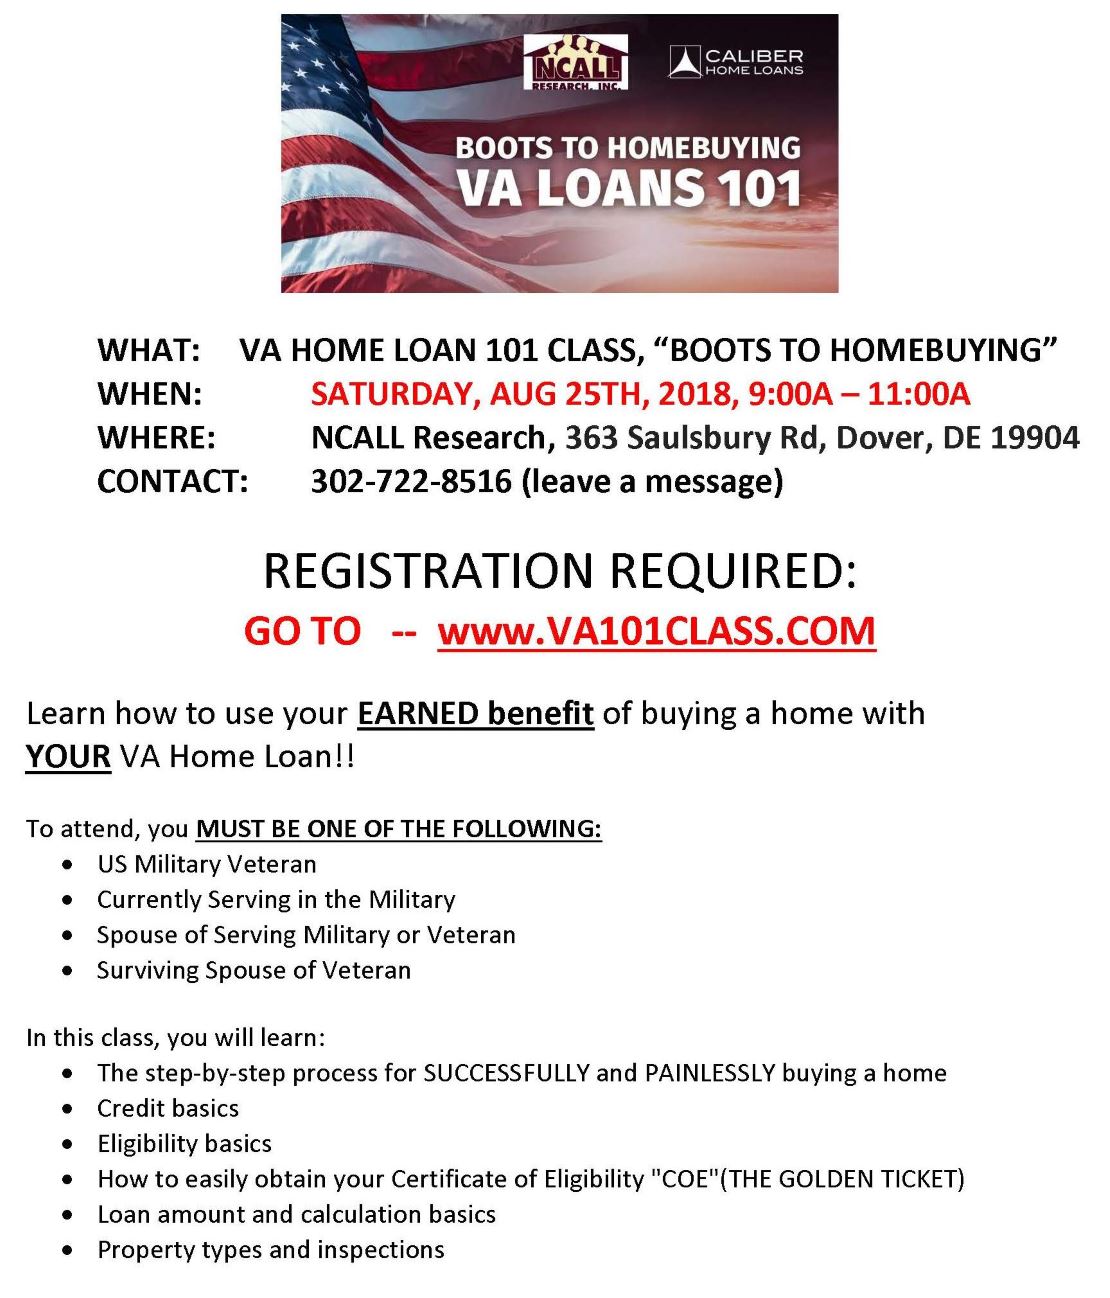 VA Home Loan 101 Class, "Boots to Homebuying"